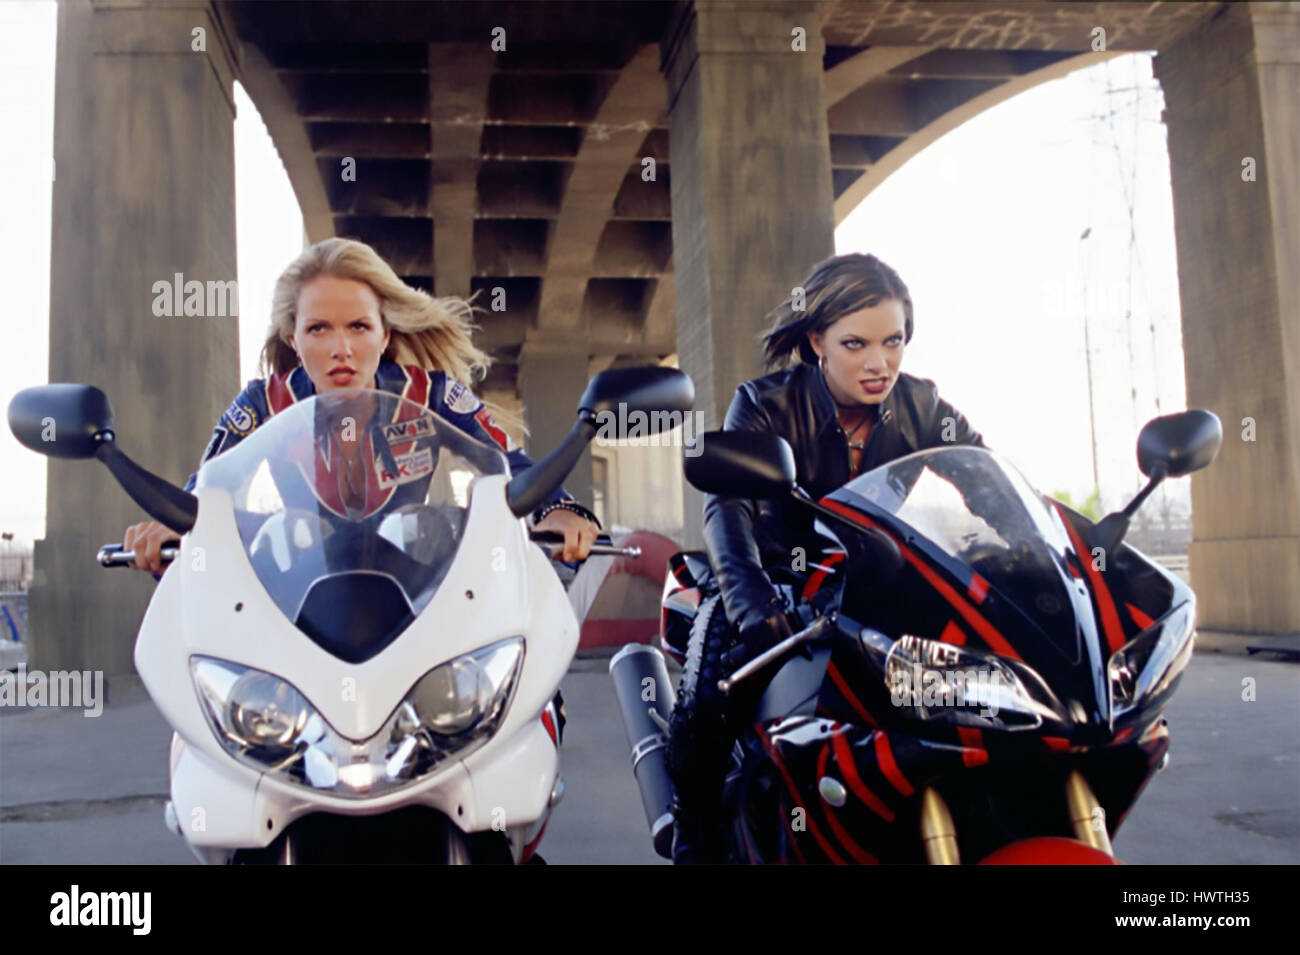 TORQUE 2004 Warner Bros film with from left: Monet Mazur and Jaime Pressly Stock Photo